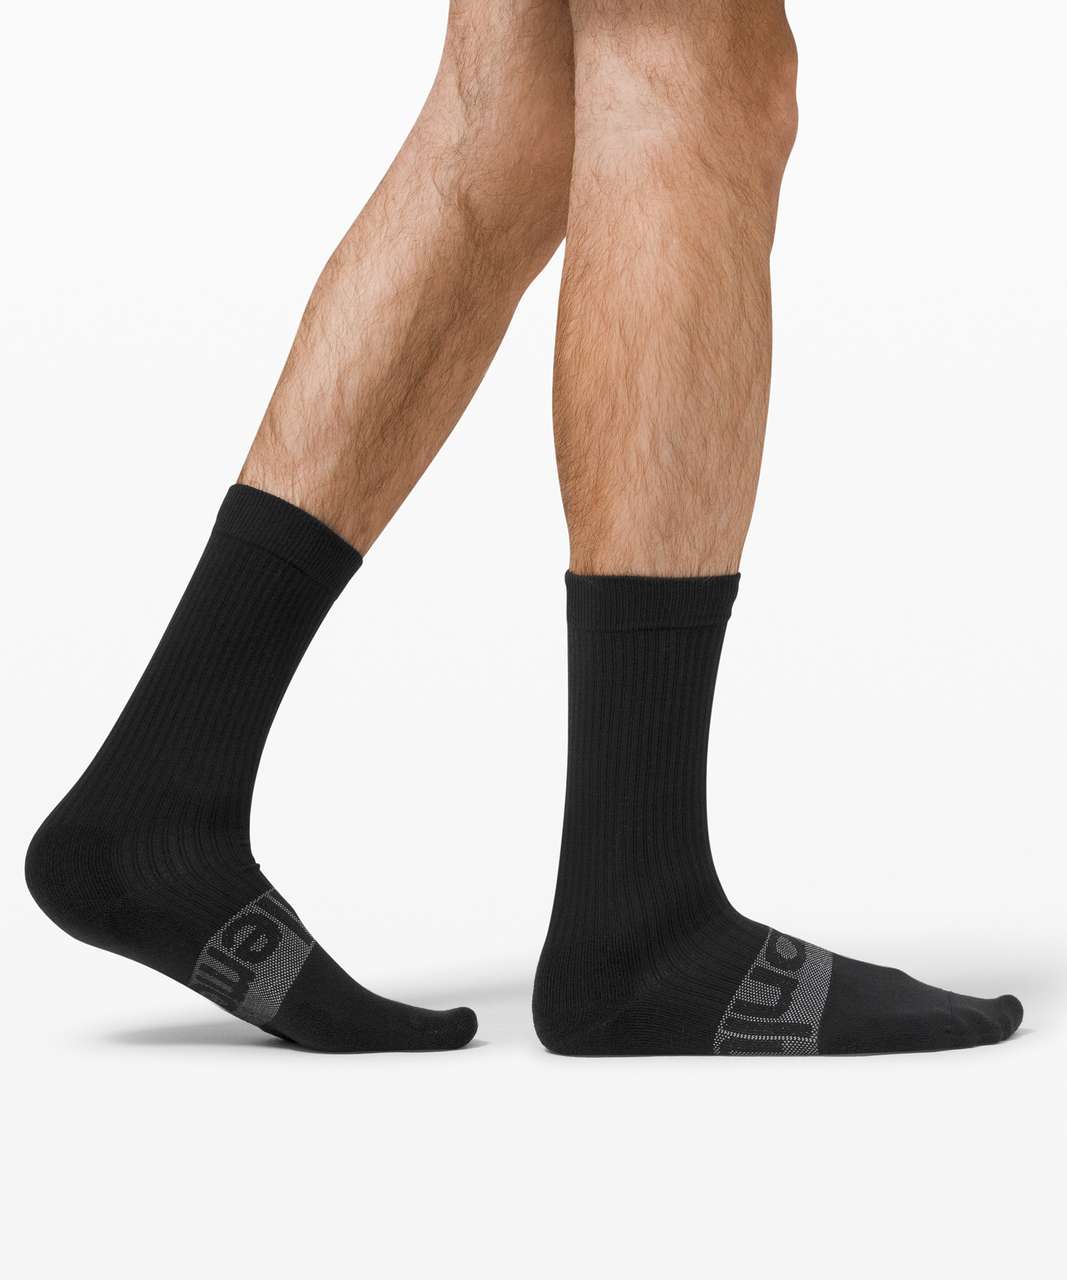 Lululemon Daily Stride Crew Sock *3 Pack - White / Heather Grey / Black (First Release)